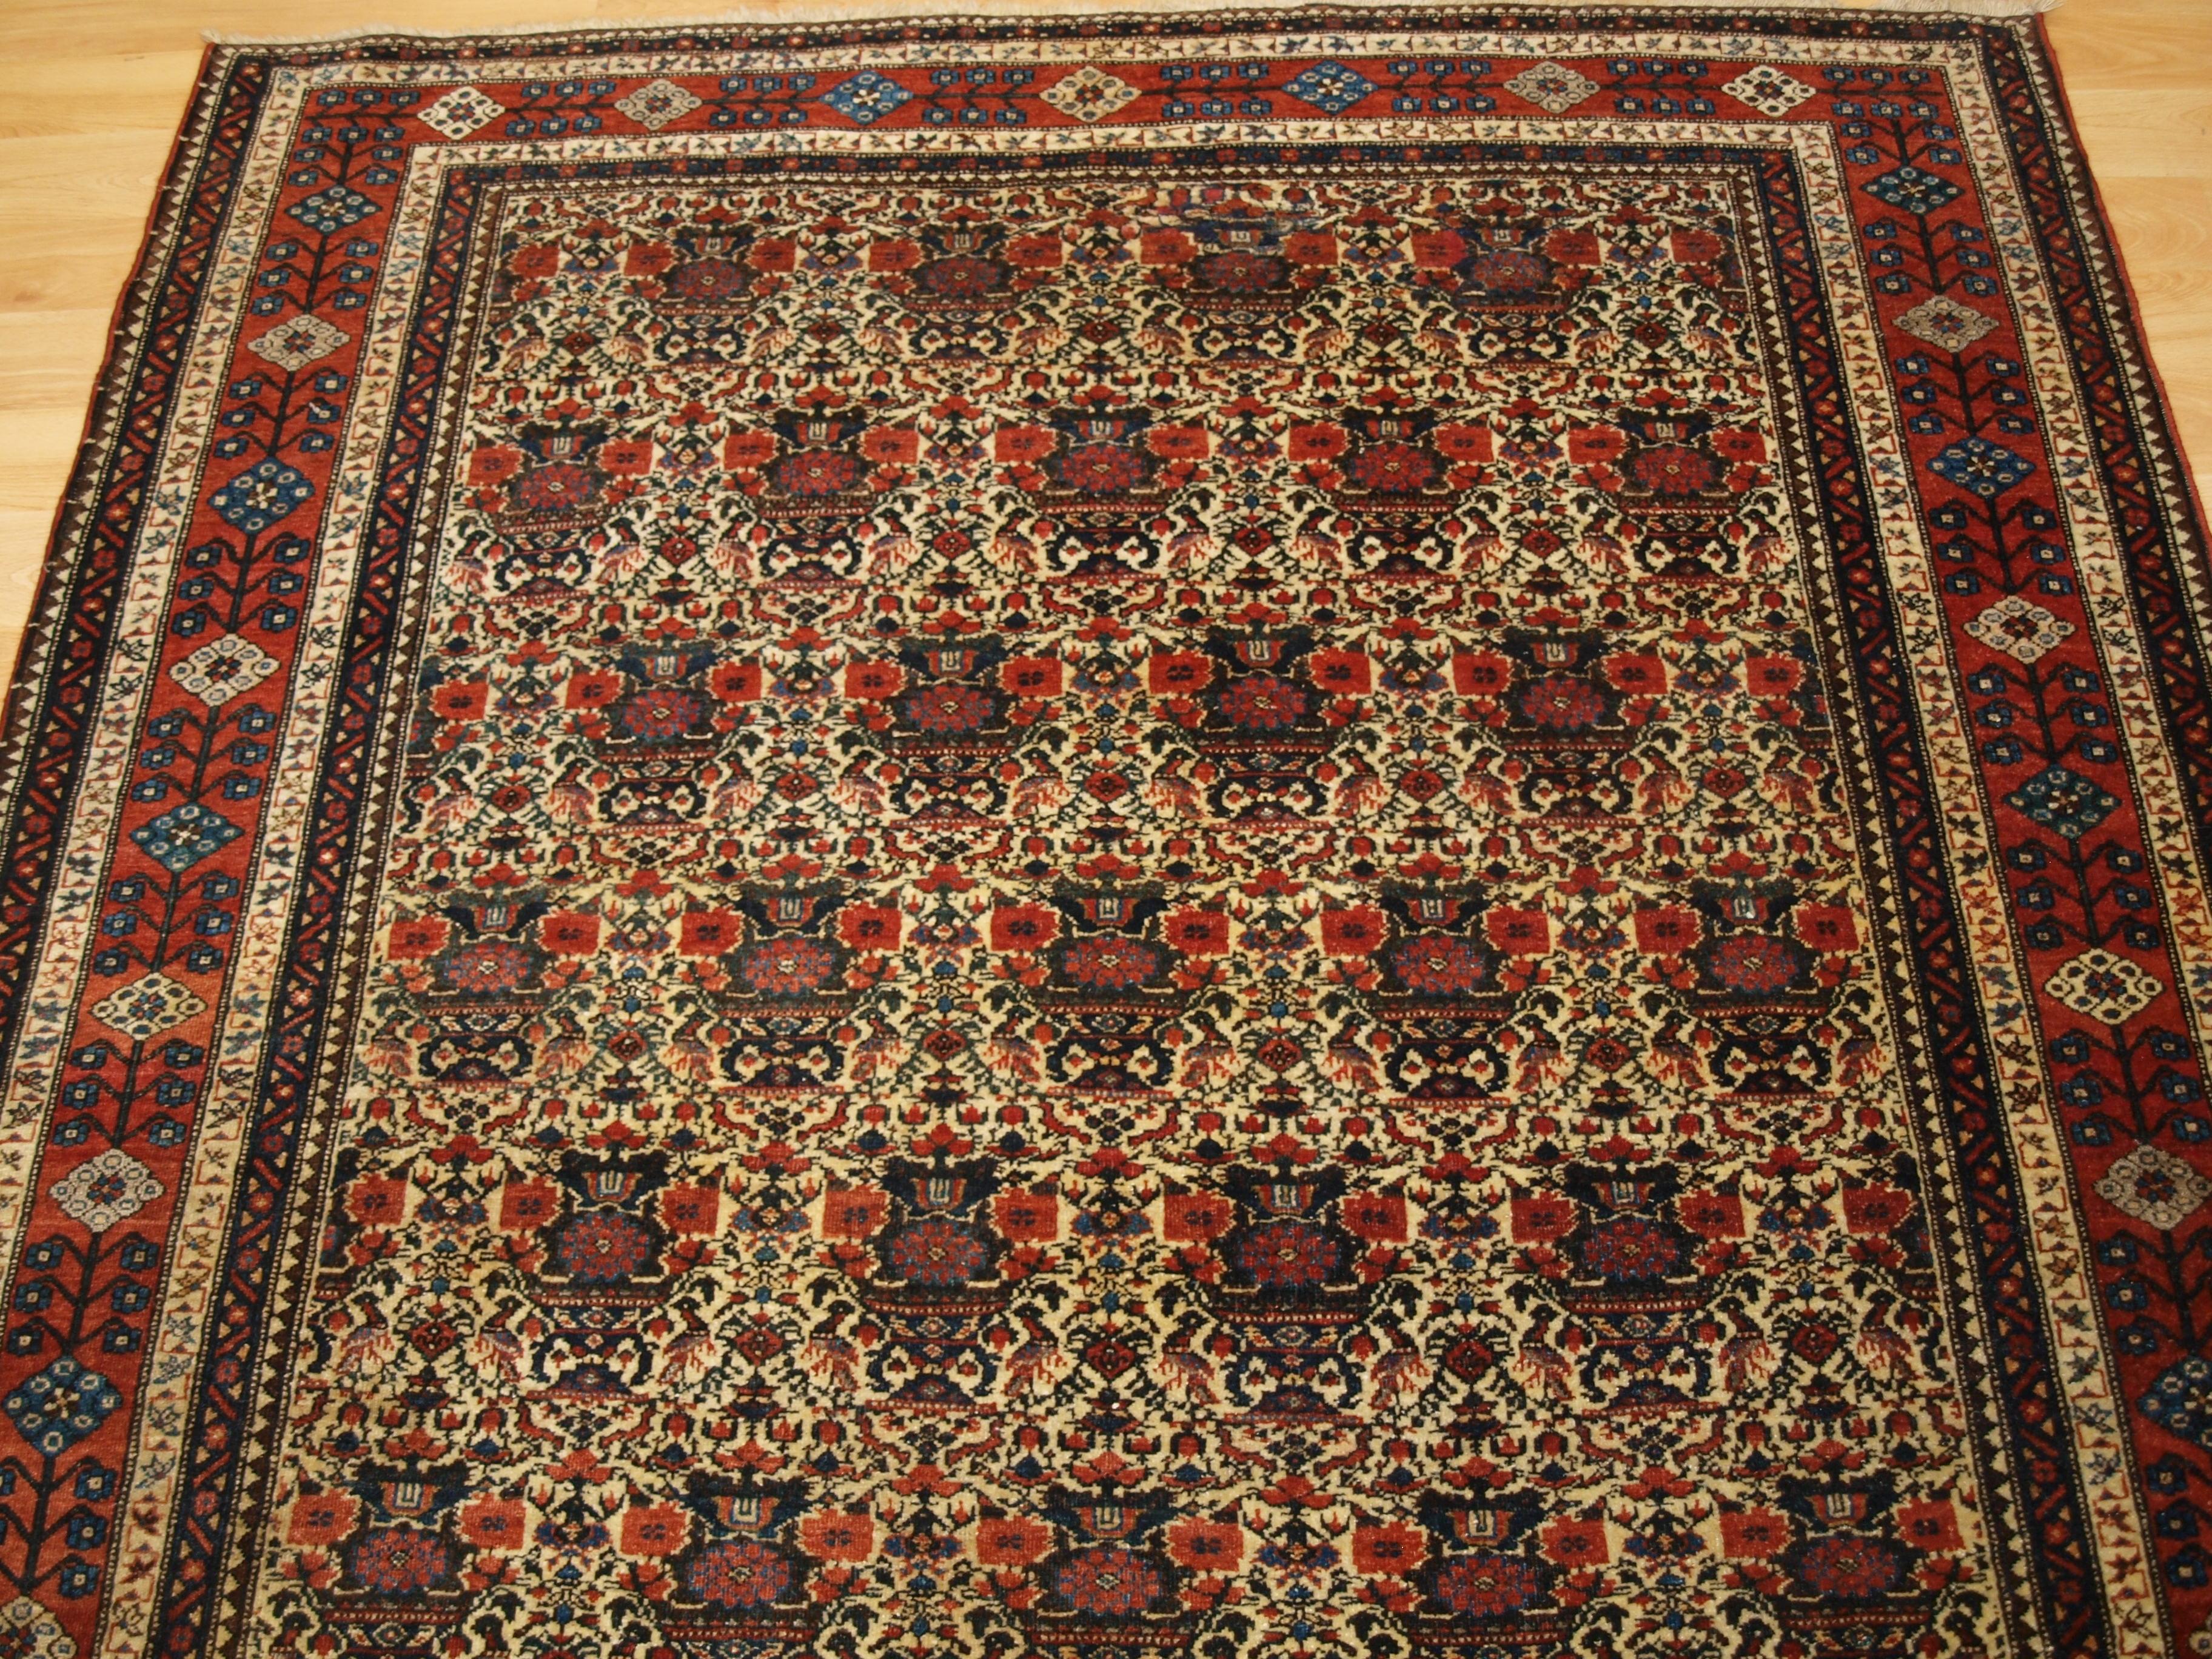 Antique Abedeh Rug with Zili Sultan Design, circa 1900 In Excellent Condition For Sale In Moreton-In-Marsh, GB